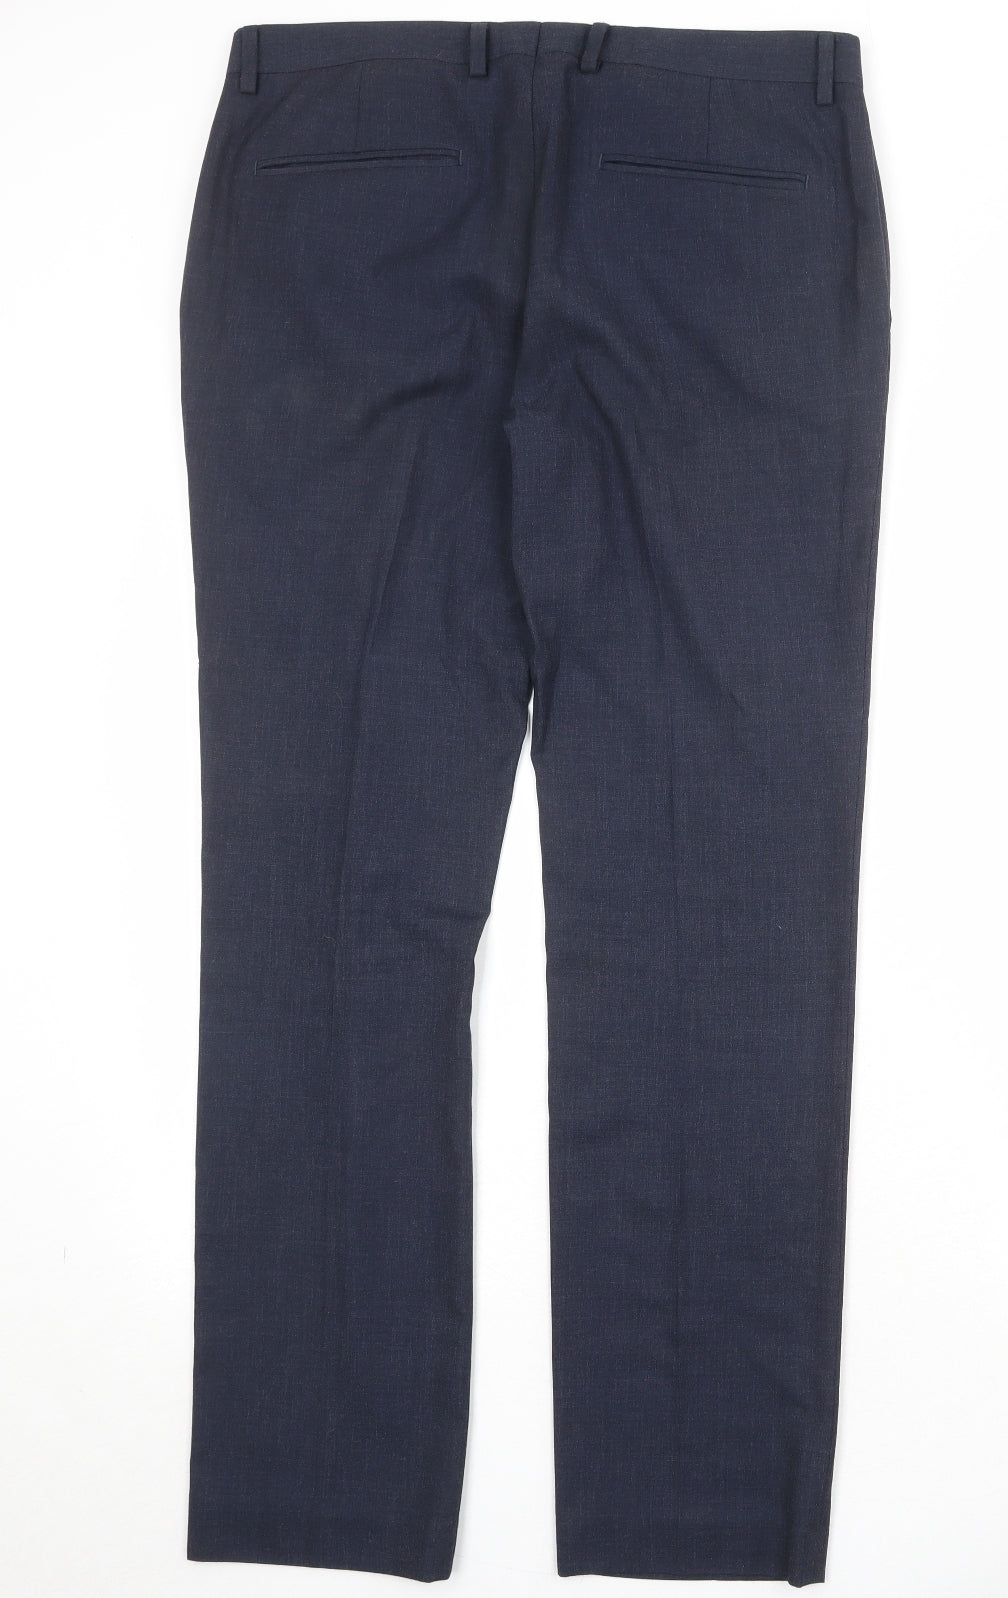 Topshop Mens Blue Polyester Dress Pants Trousers Size 34 in Regular Zip